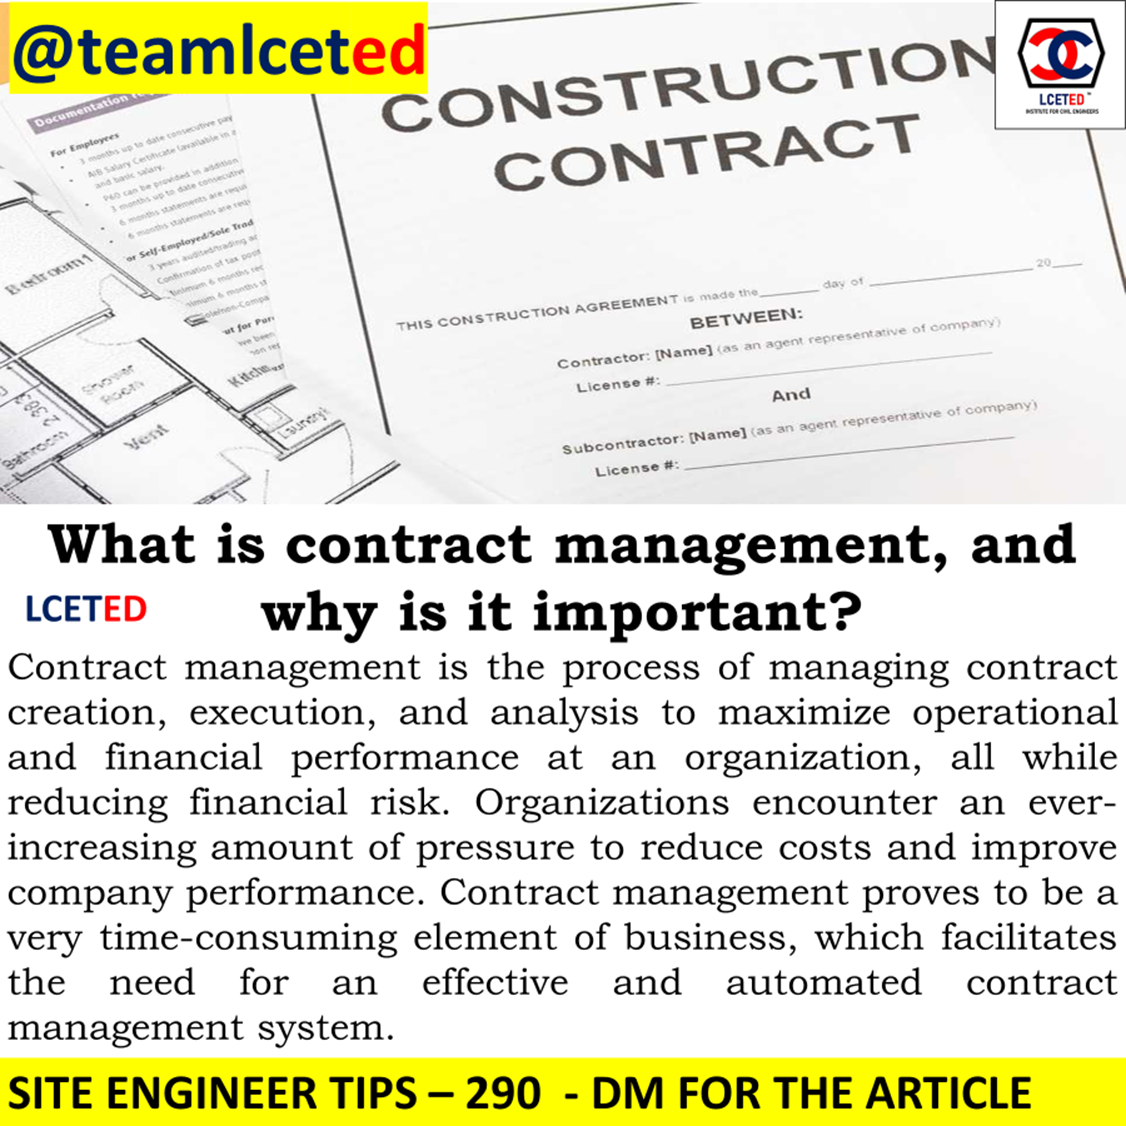 Guide to Contract Management